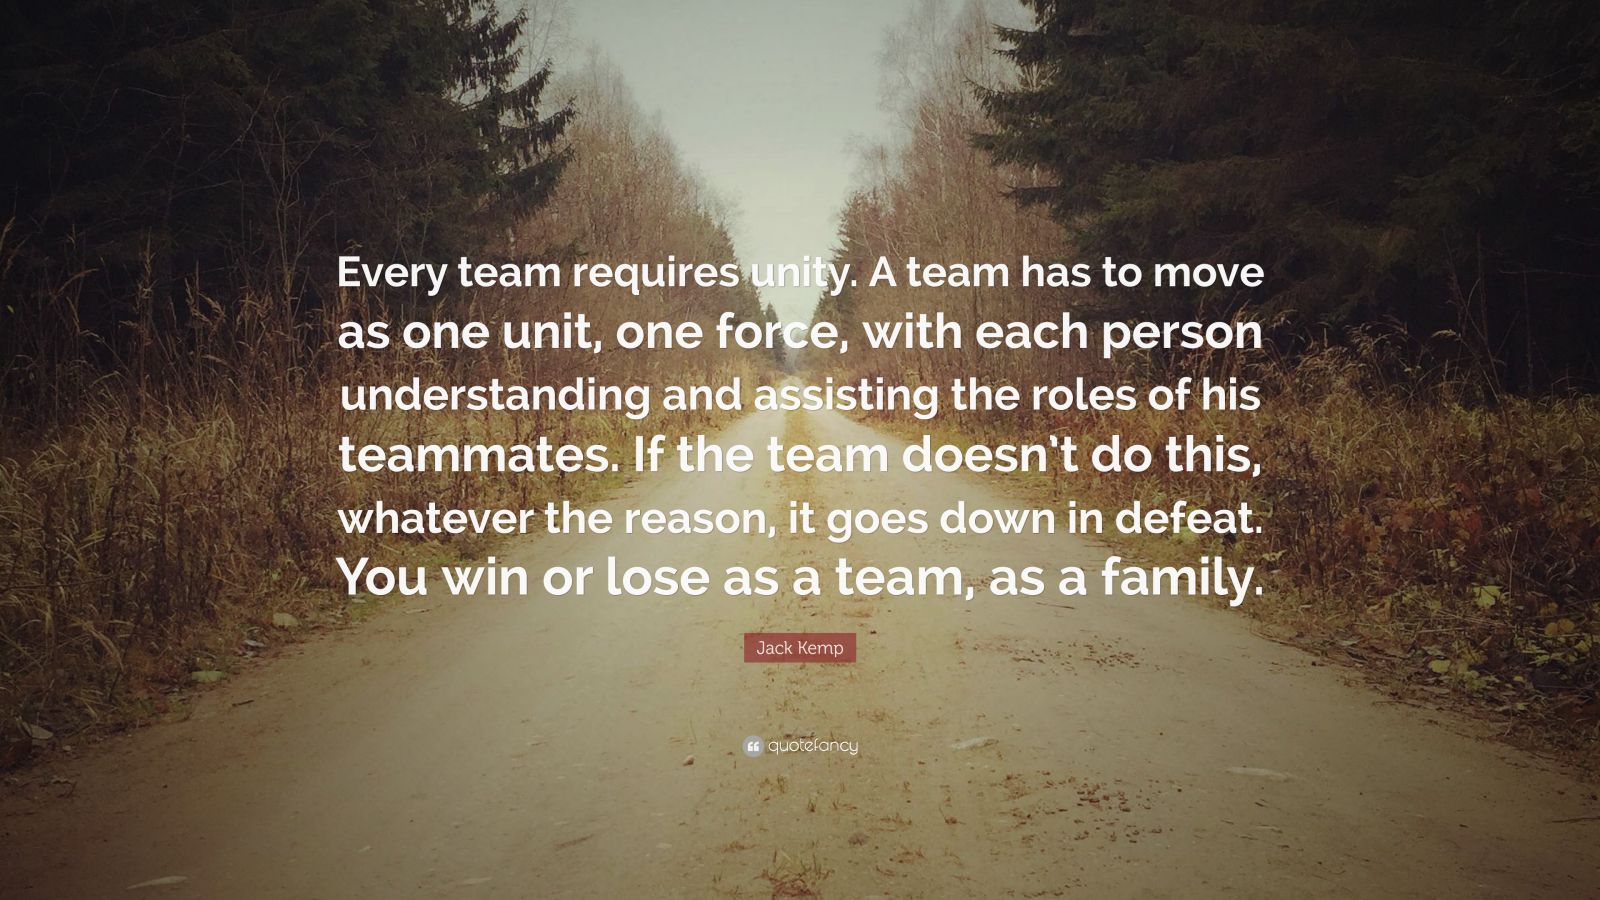 Jack Kemp Quote: “Every team requires unity. A team has to move as one